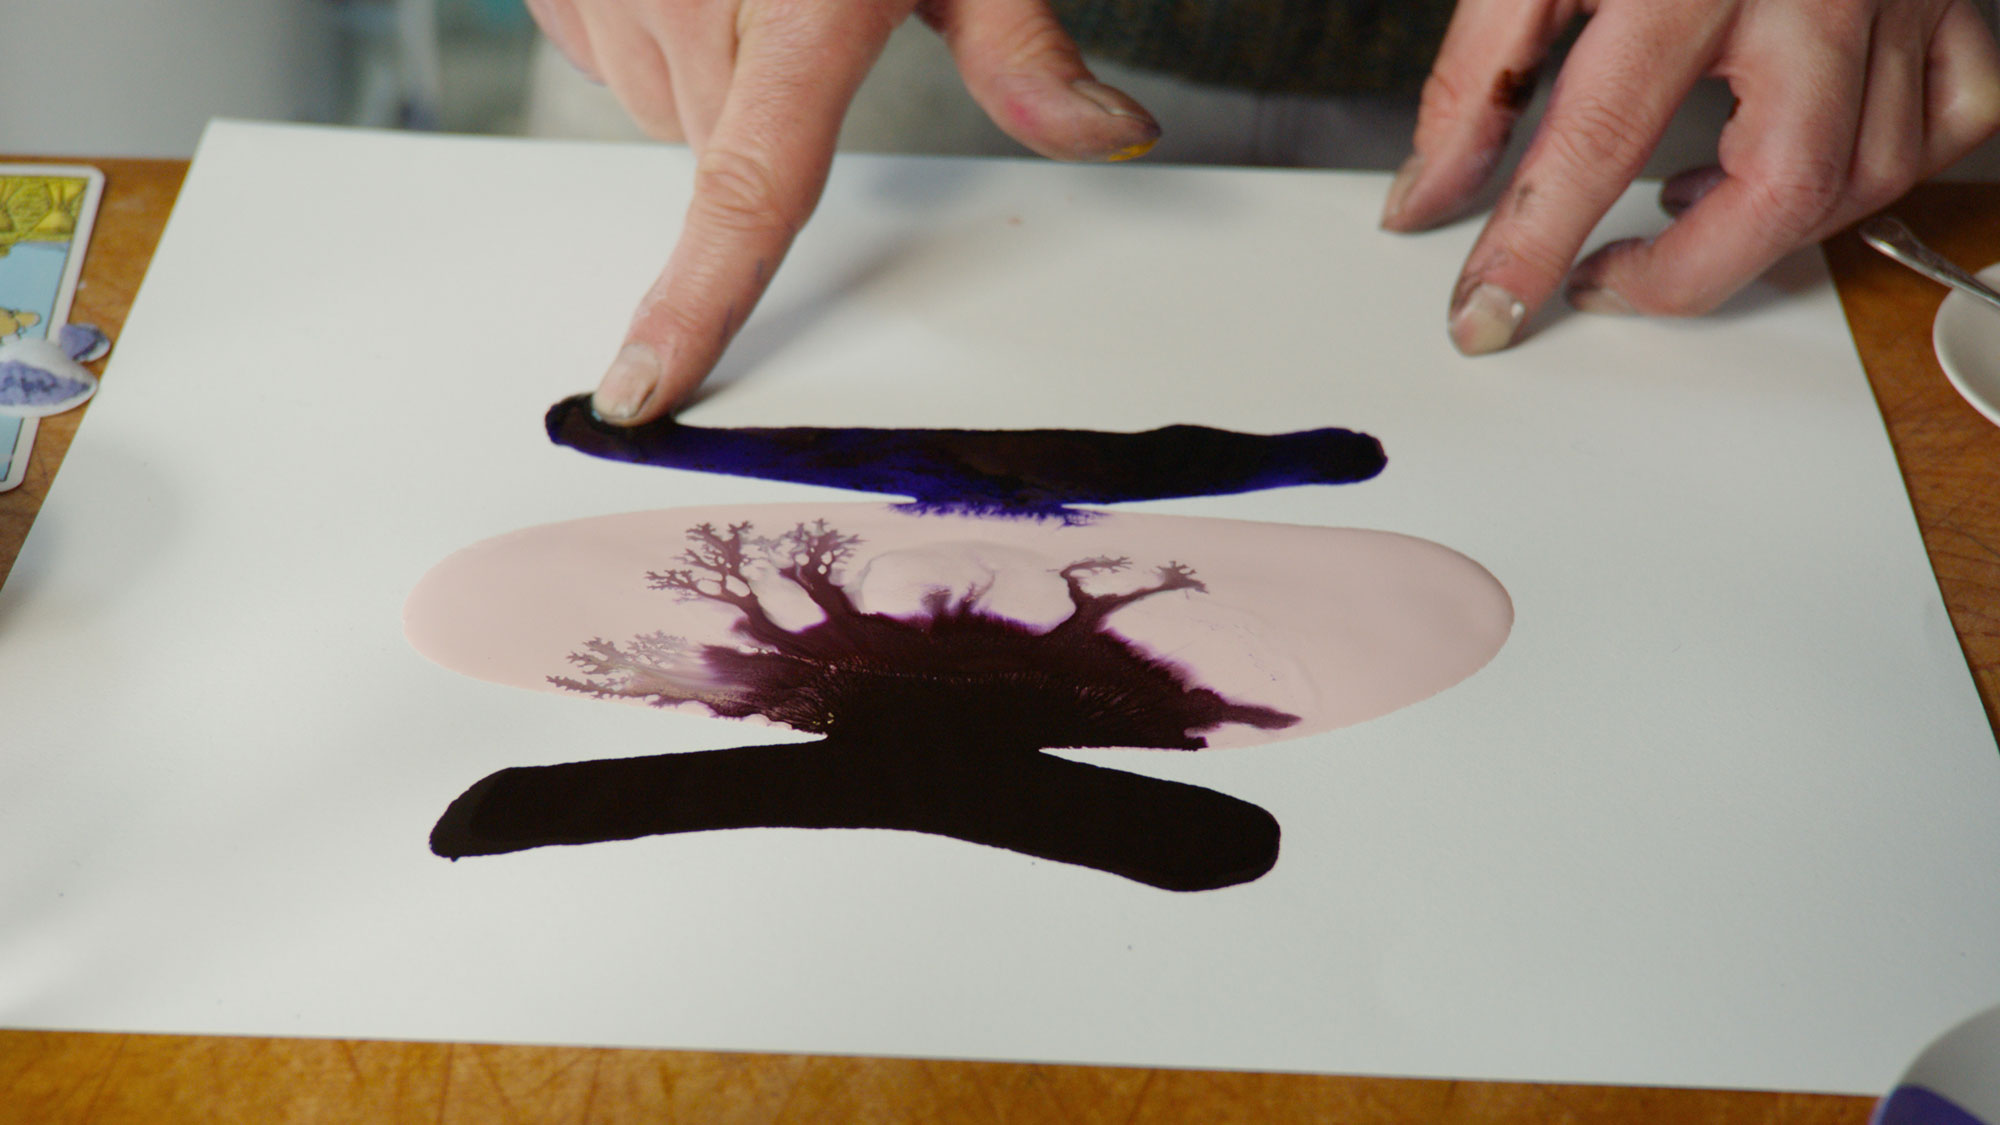 Jason Logan conducts an ink test. | Still from 'The Colour of Ink' | Photo: Courtesy of the National Film Board of Canada and Sphinx Productions, 2022